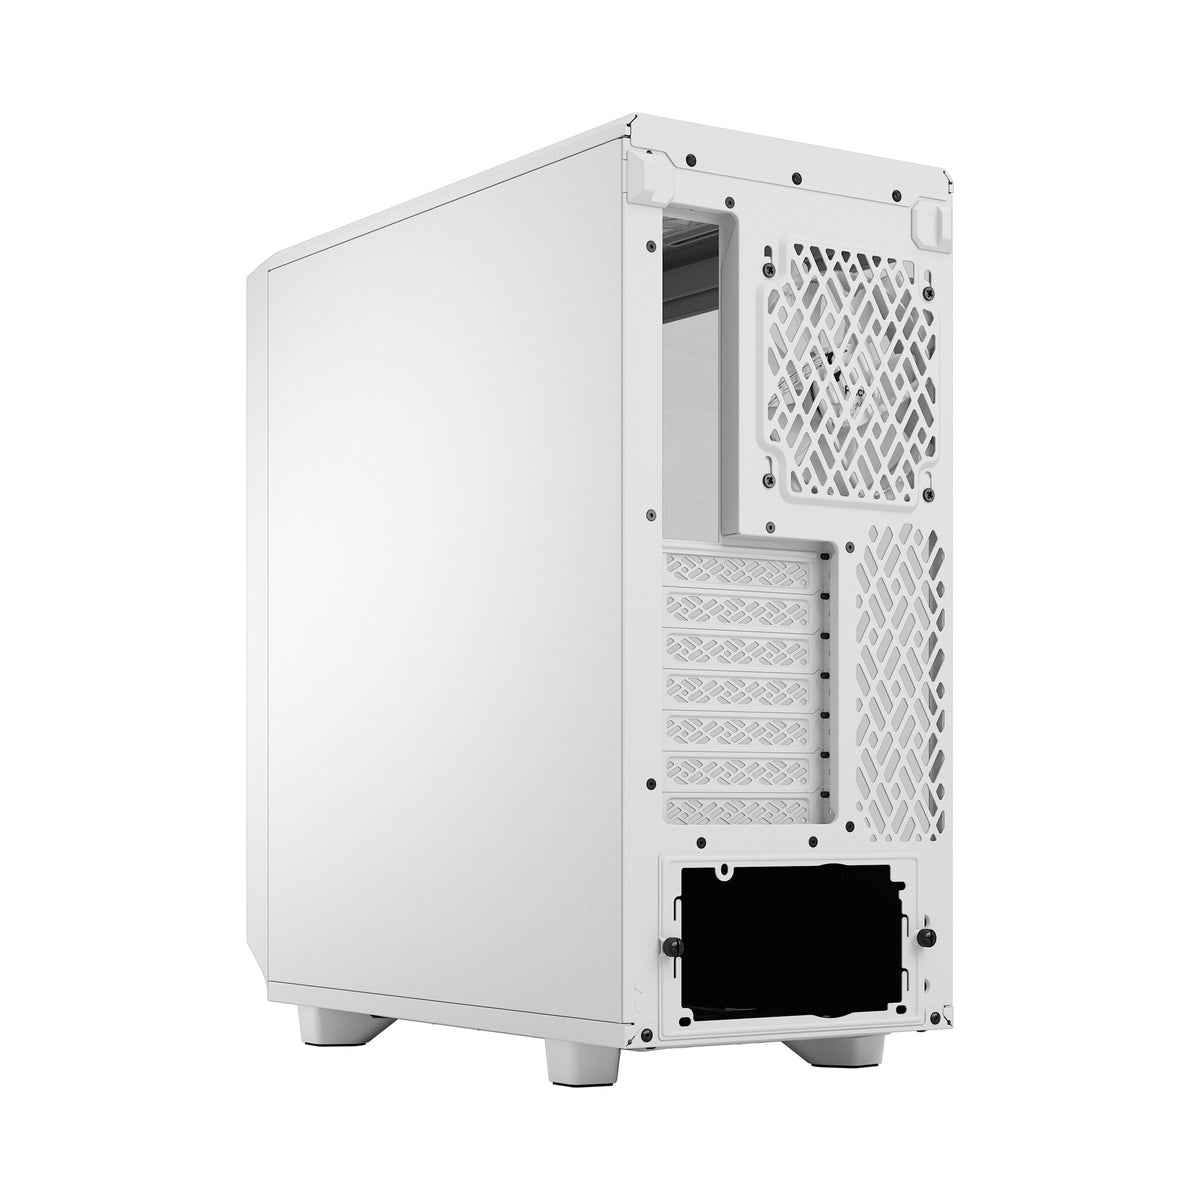 Fractal Design Meshify 2 Compact Lite - ATX Mid Tower Case in White